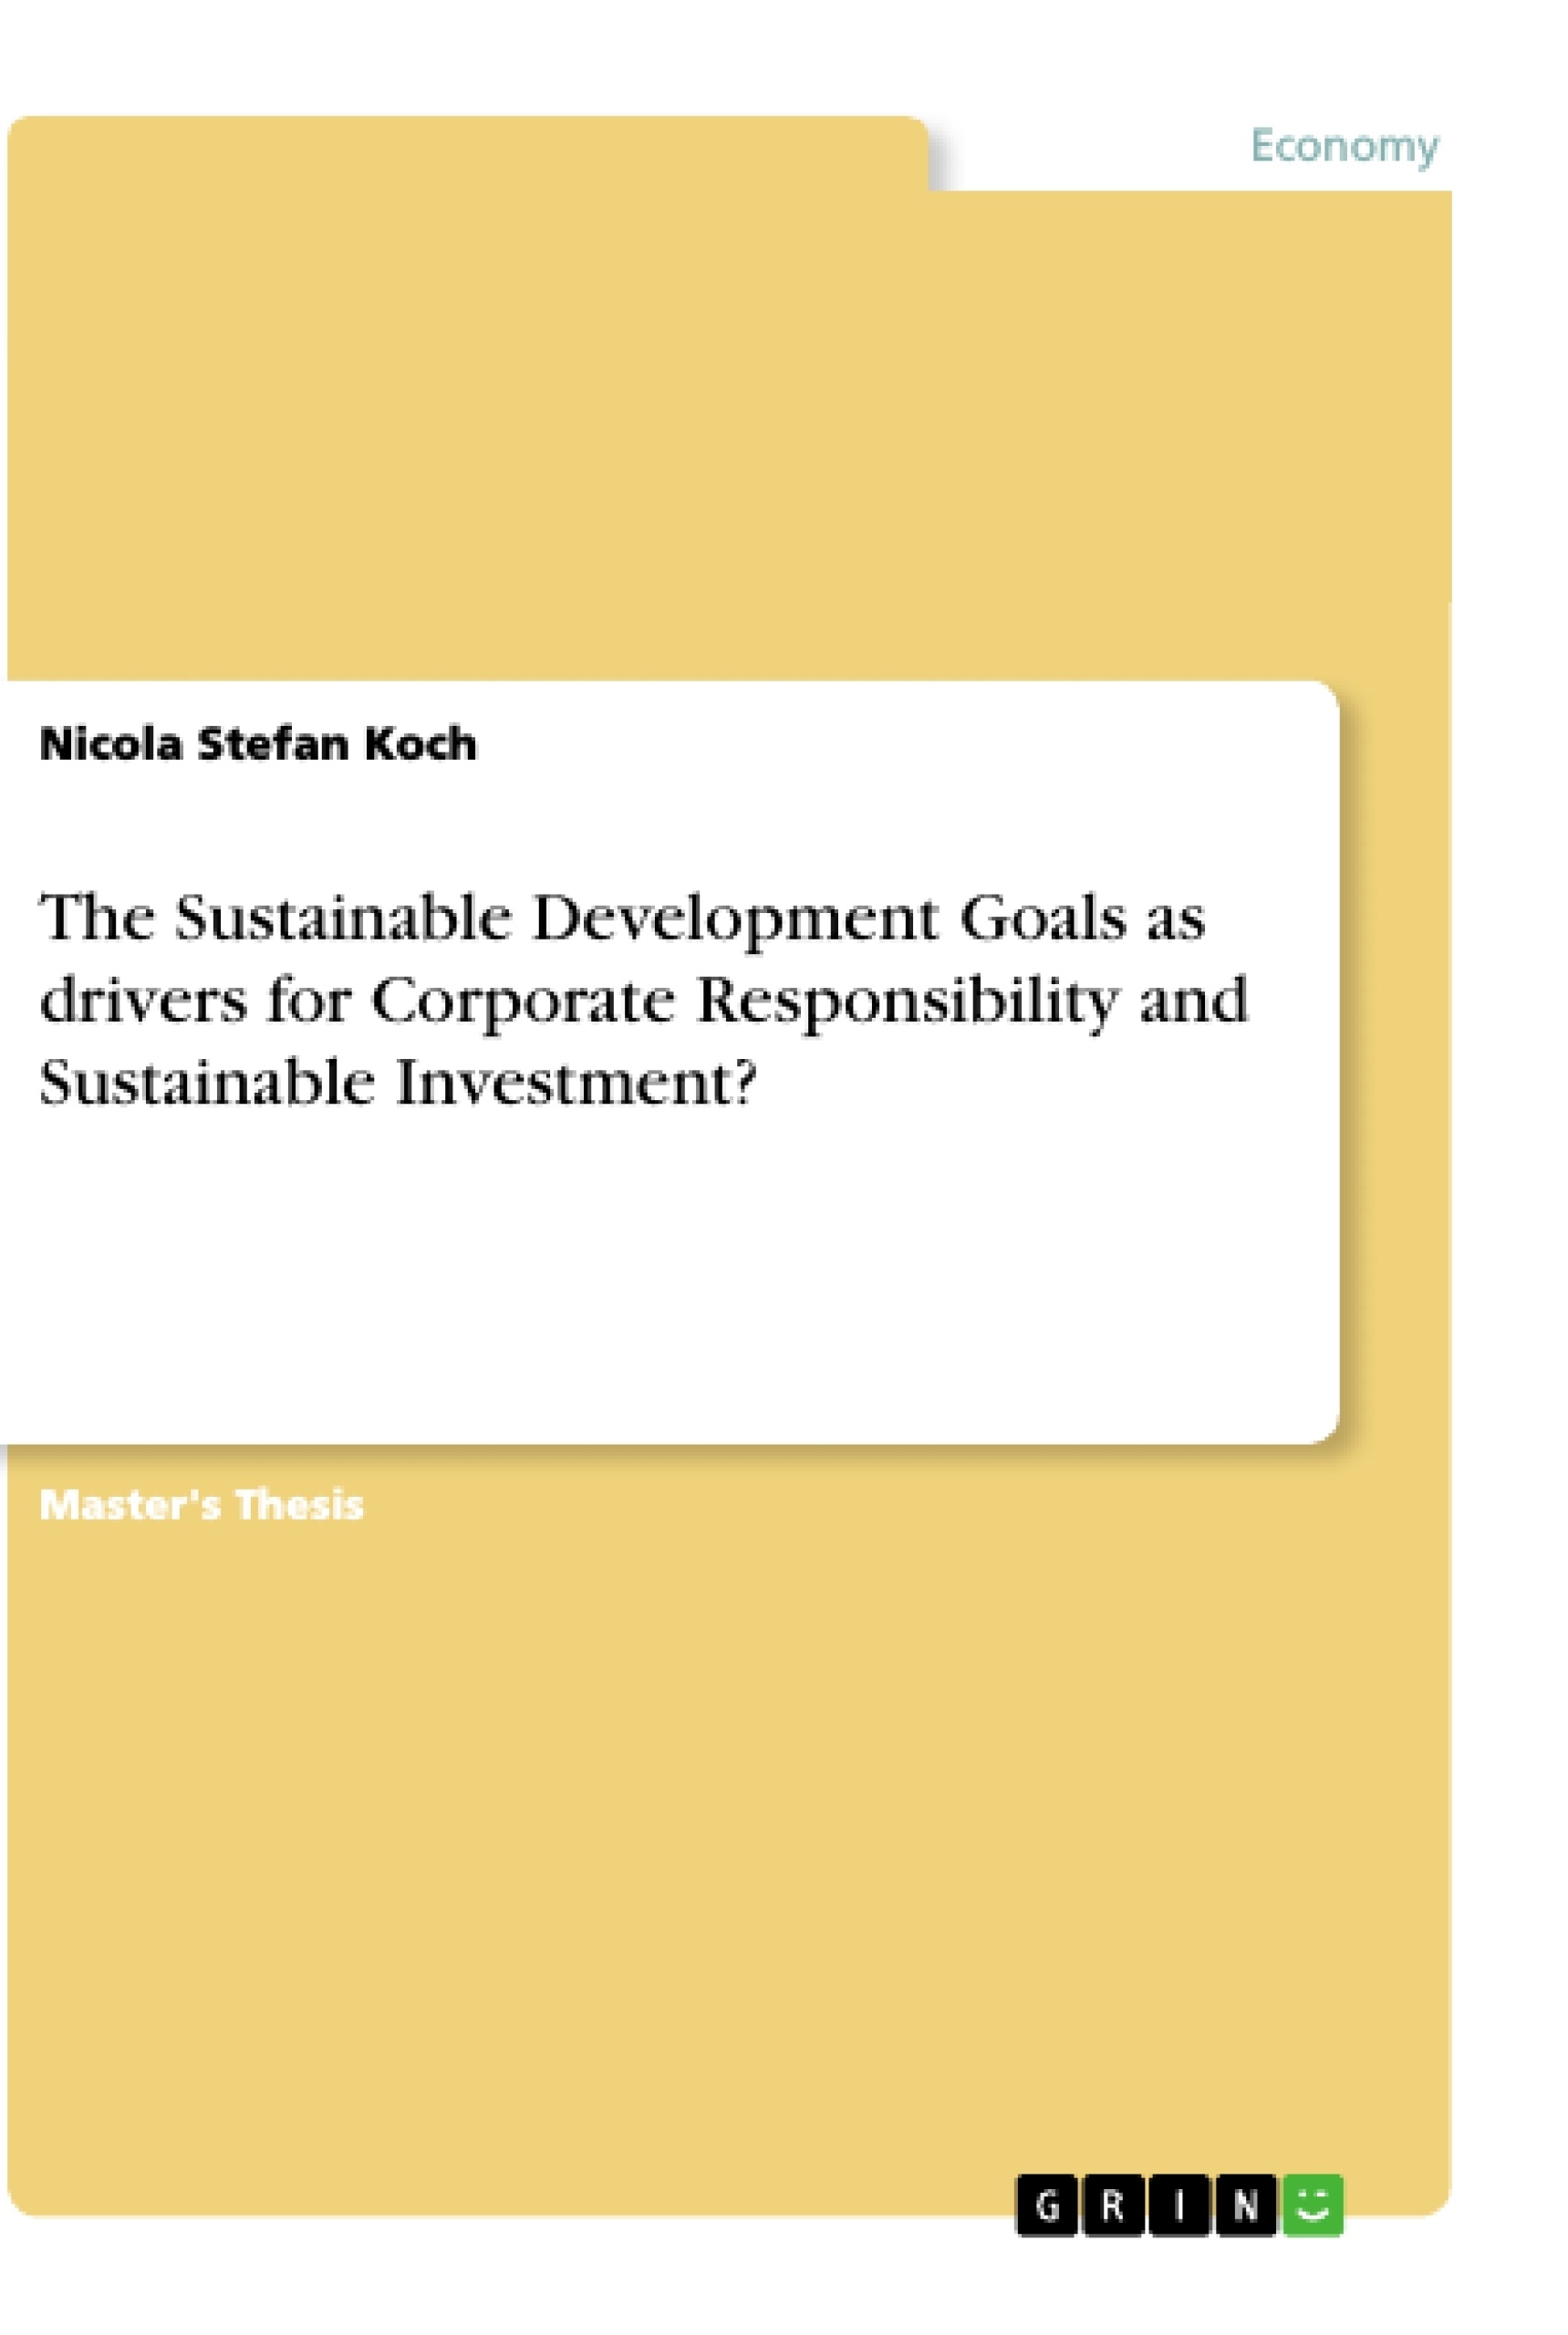 Title: The Sustainable Development Goals as drivers for Corporate Responsibility and Sustainable Investment?